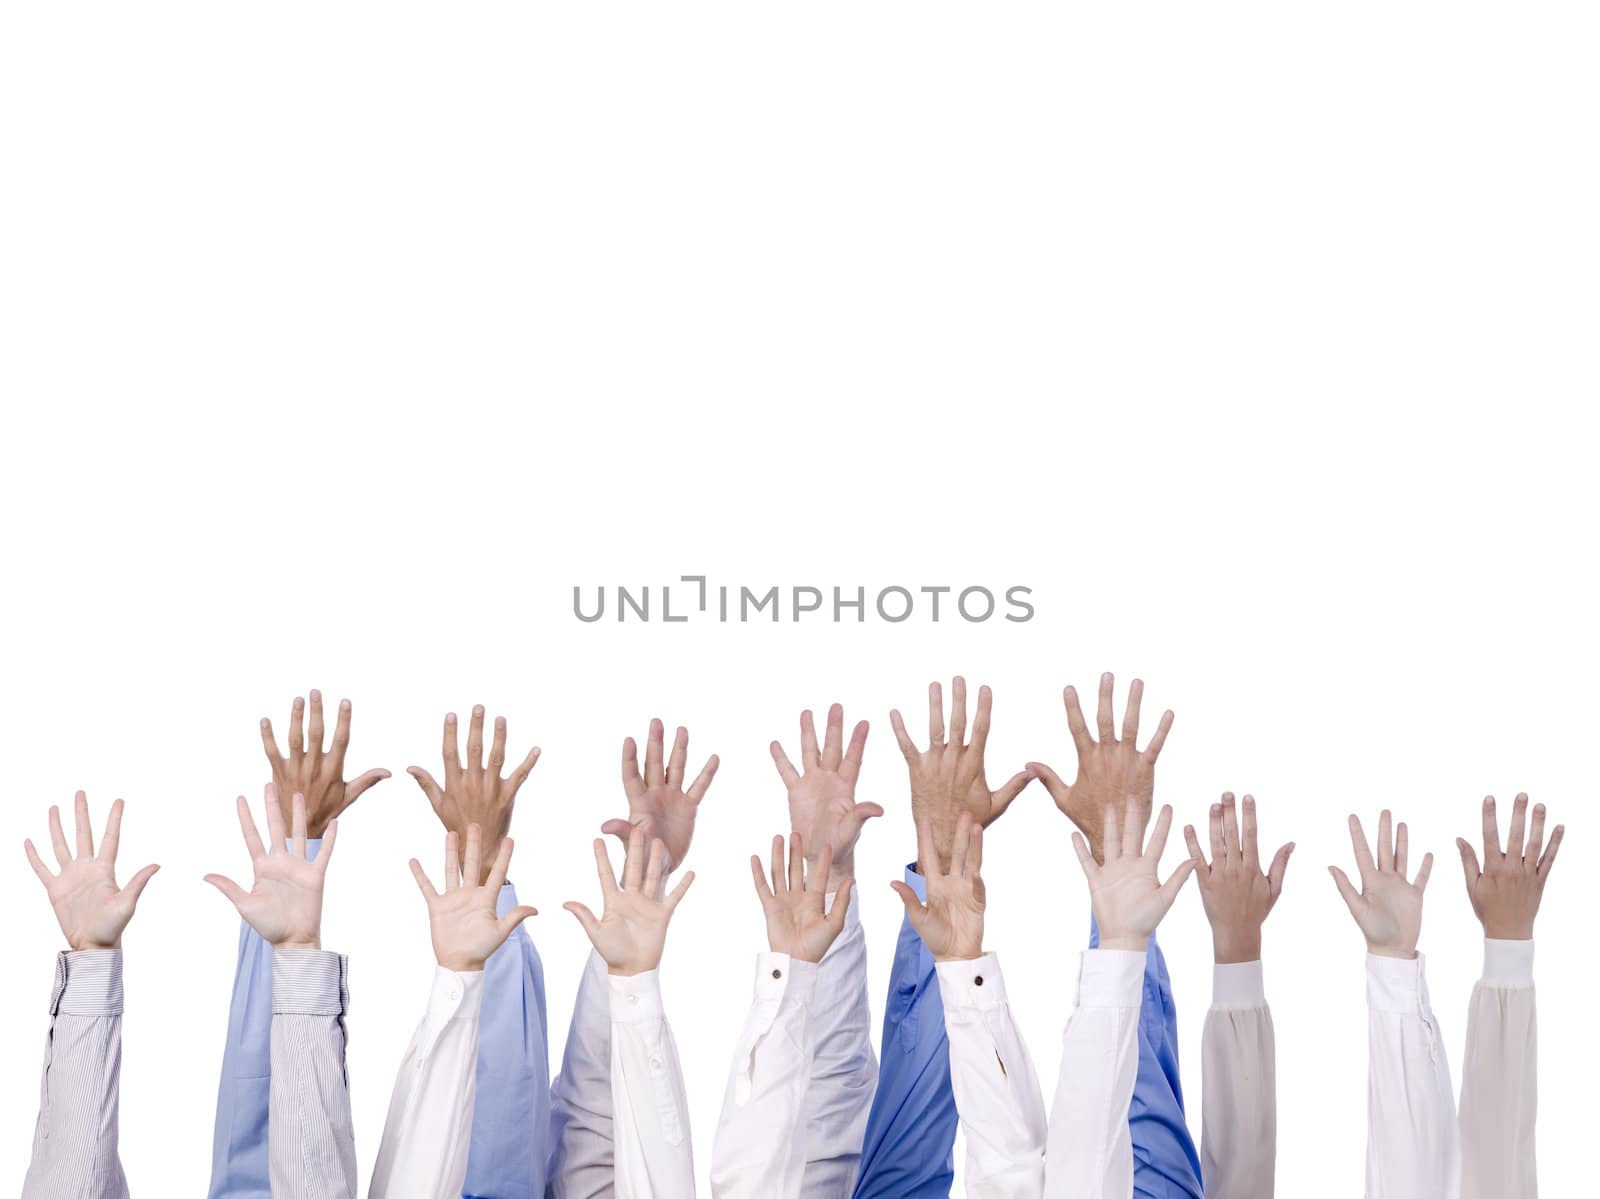 Close-up image of a group of hands reaching to the top isolated against the white background